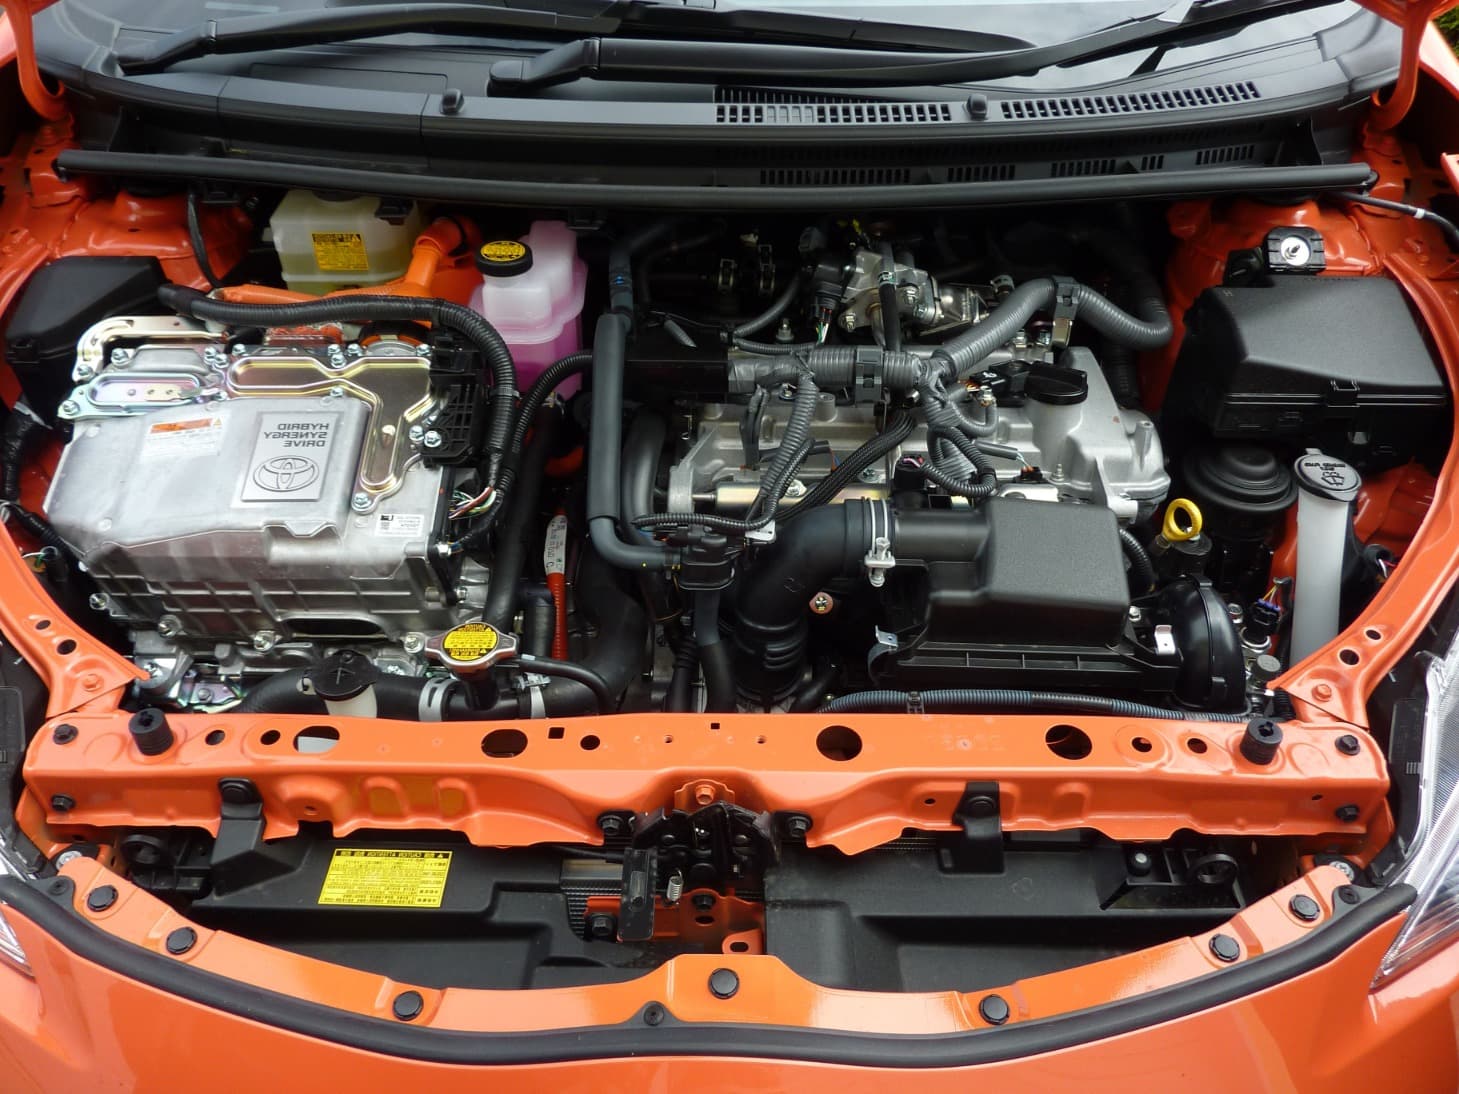 How To Change A Car Battery Without Losing Settings